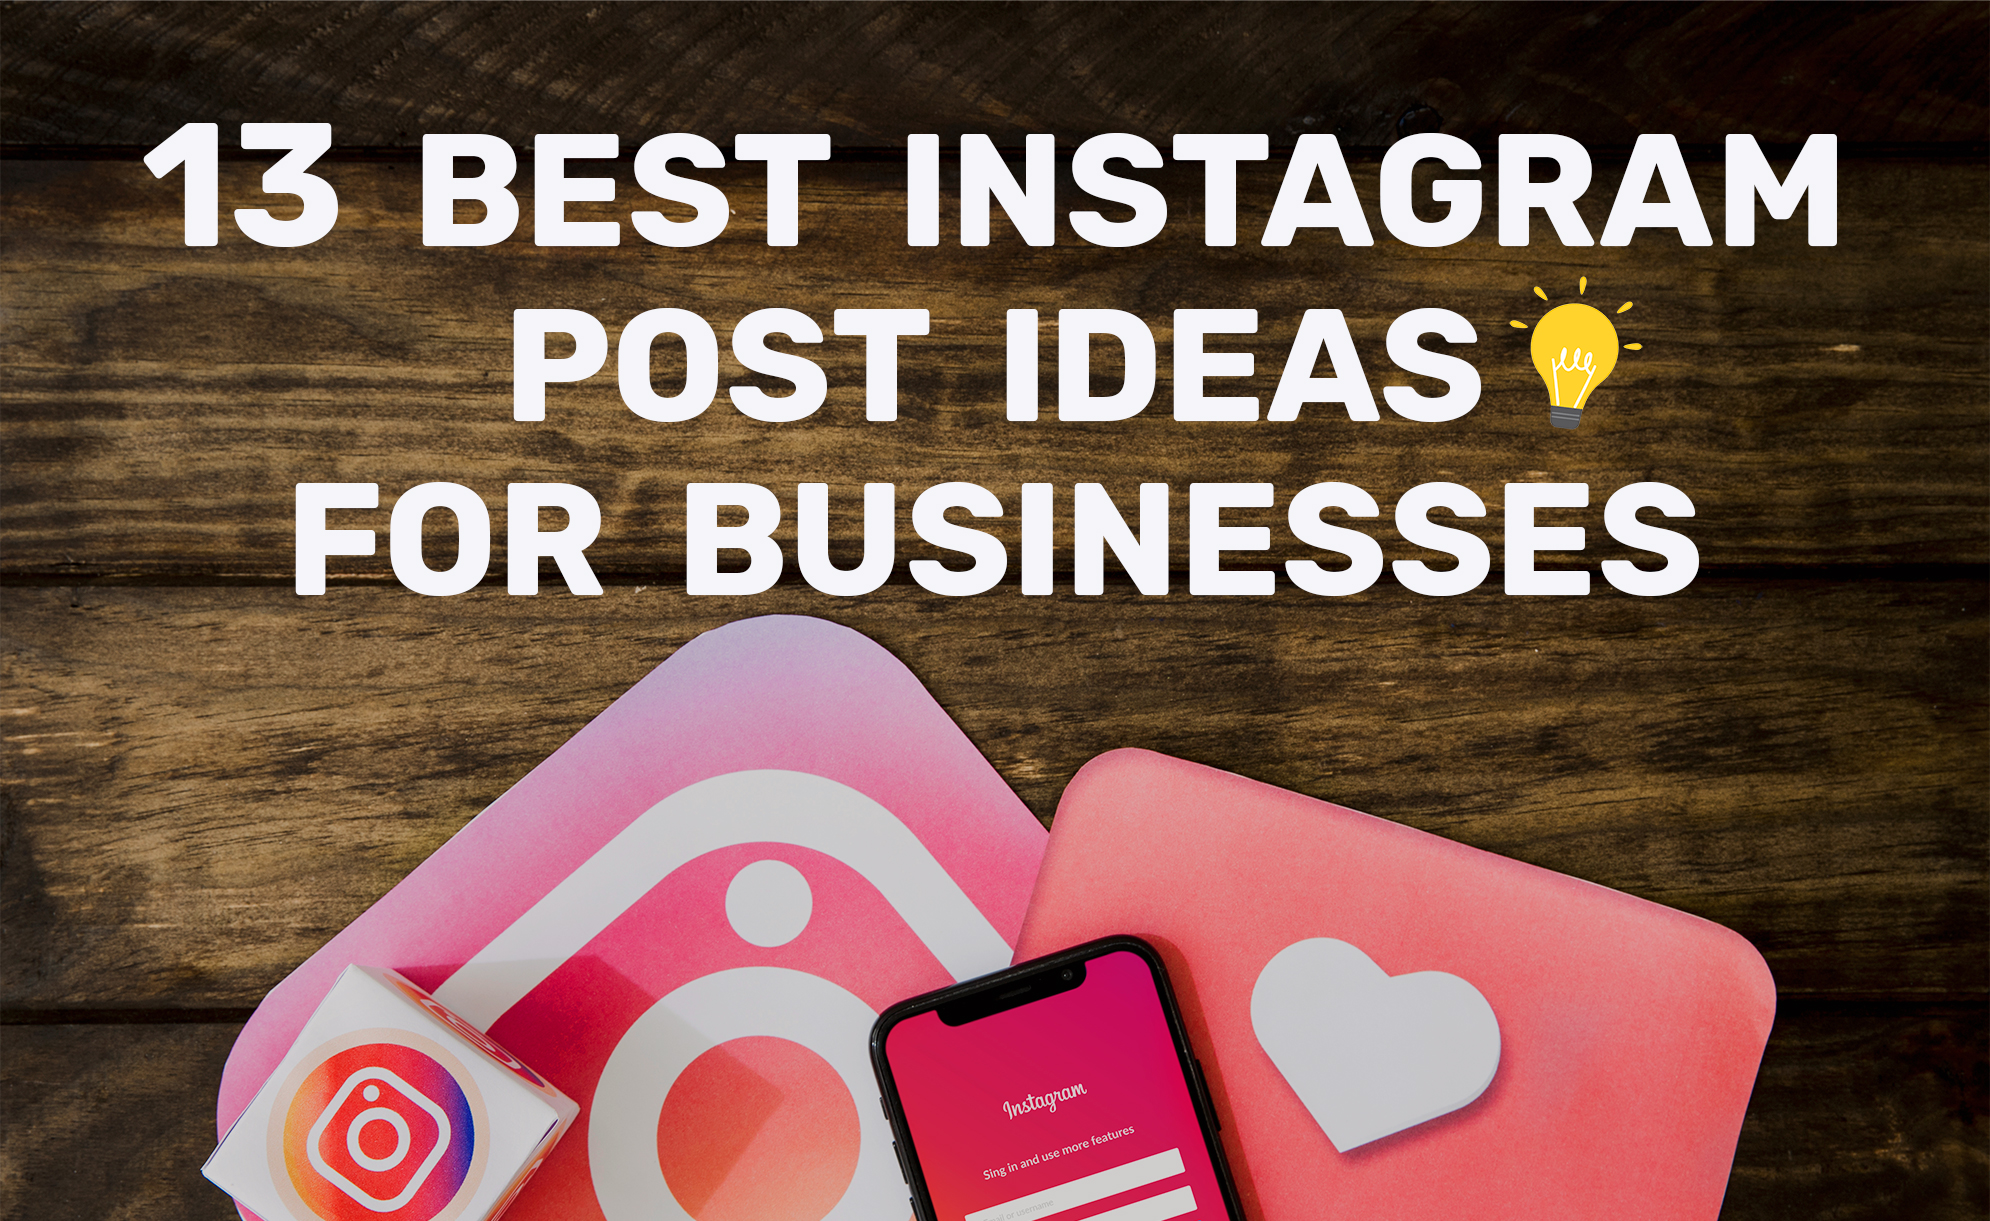 13-of-the-best-instagram-post-ideas-for-businesses-to-improve